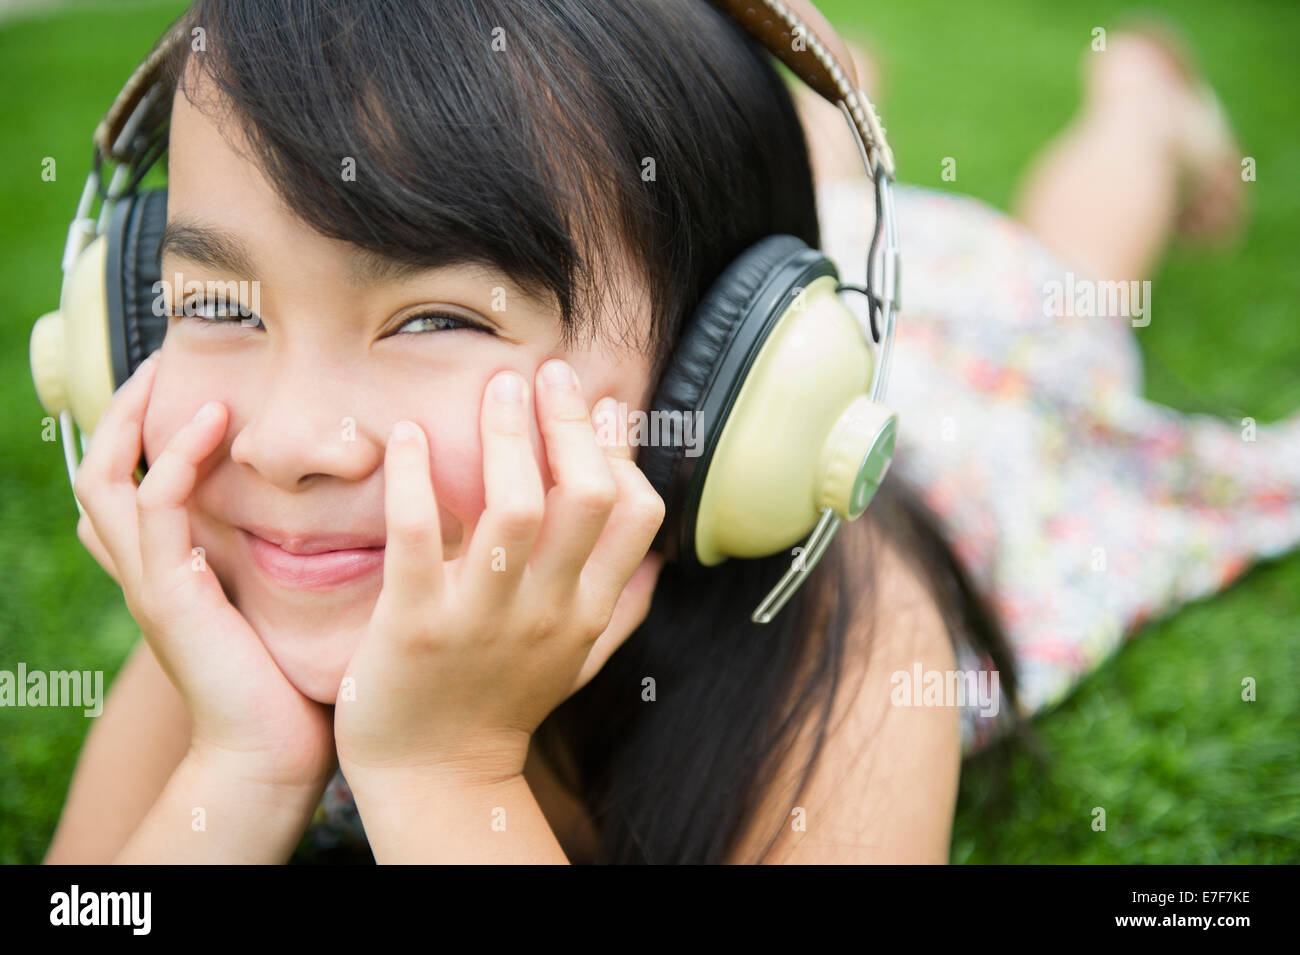 Filipino girl listening to headphones outdoors Banque D'Images